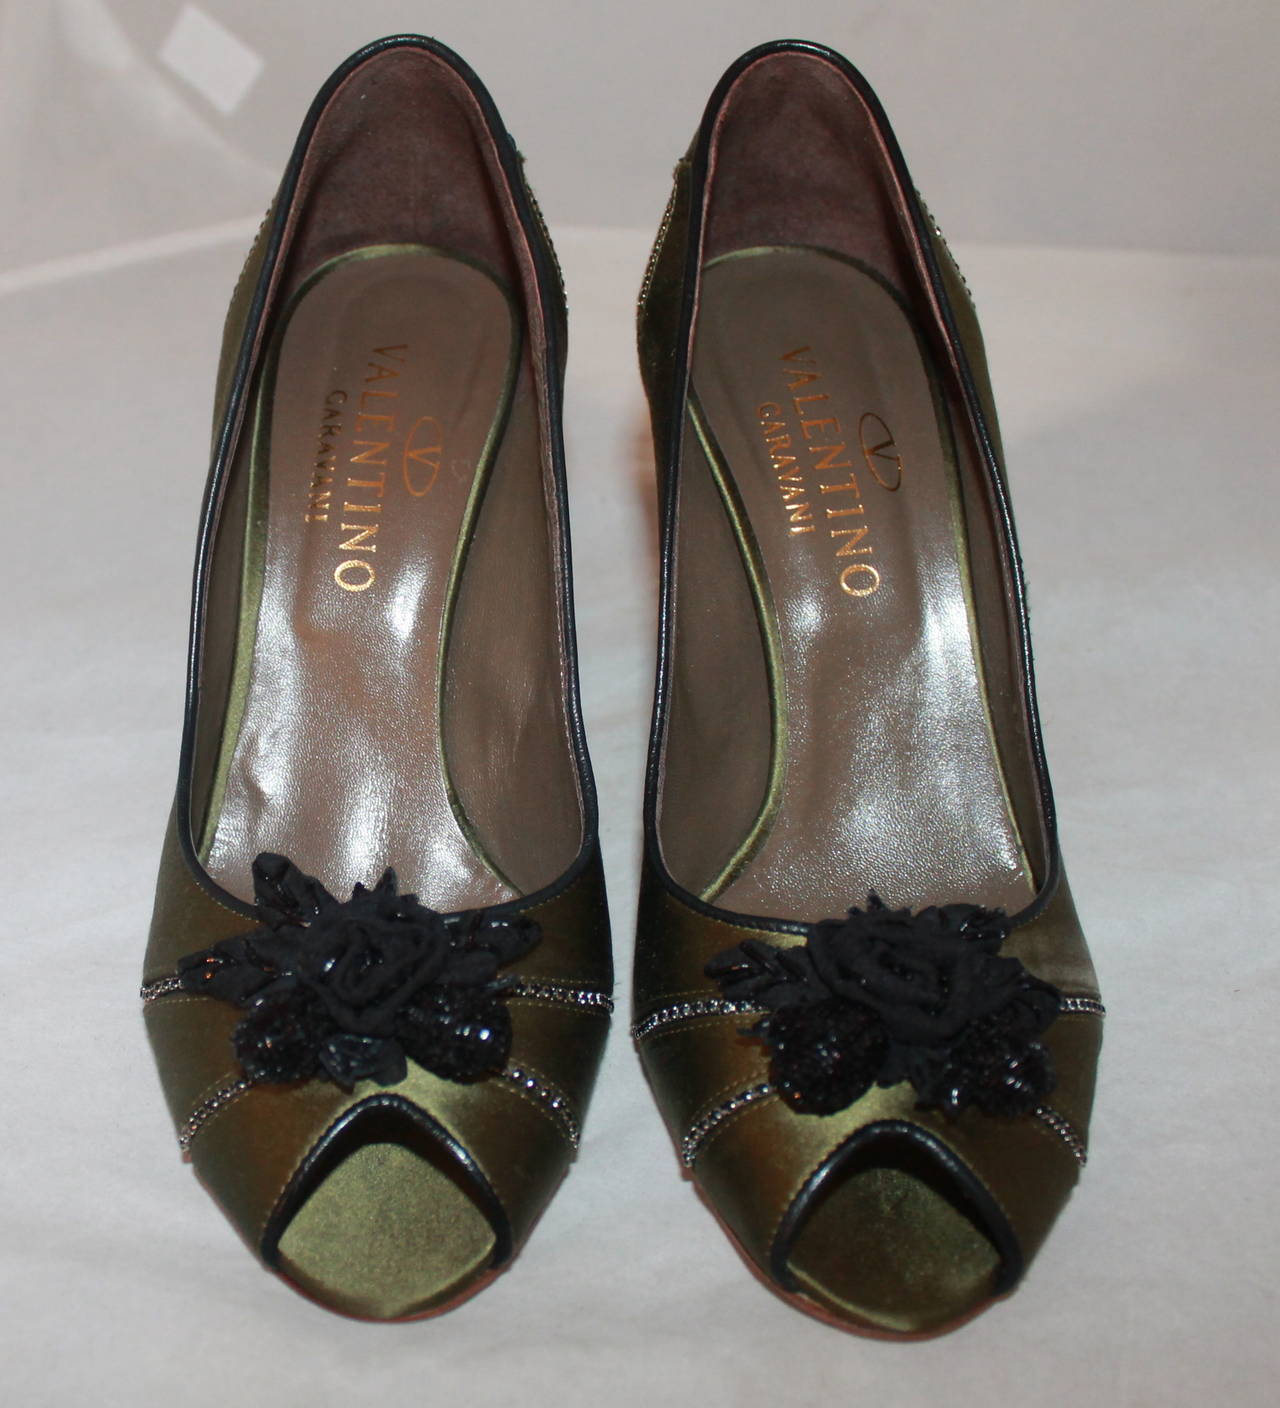 Valentino Olive & Black Rhinestone Peep Toe Heels - 39.5. These shoes are in excellent condition with very minor wear.